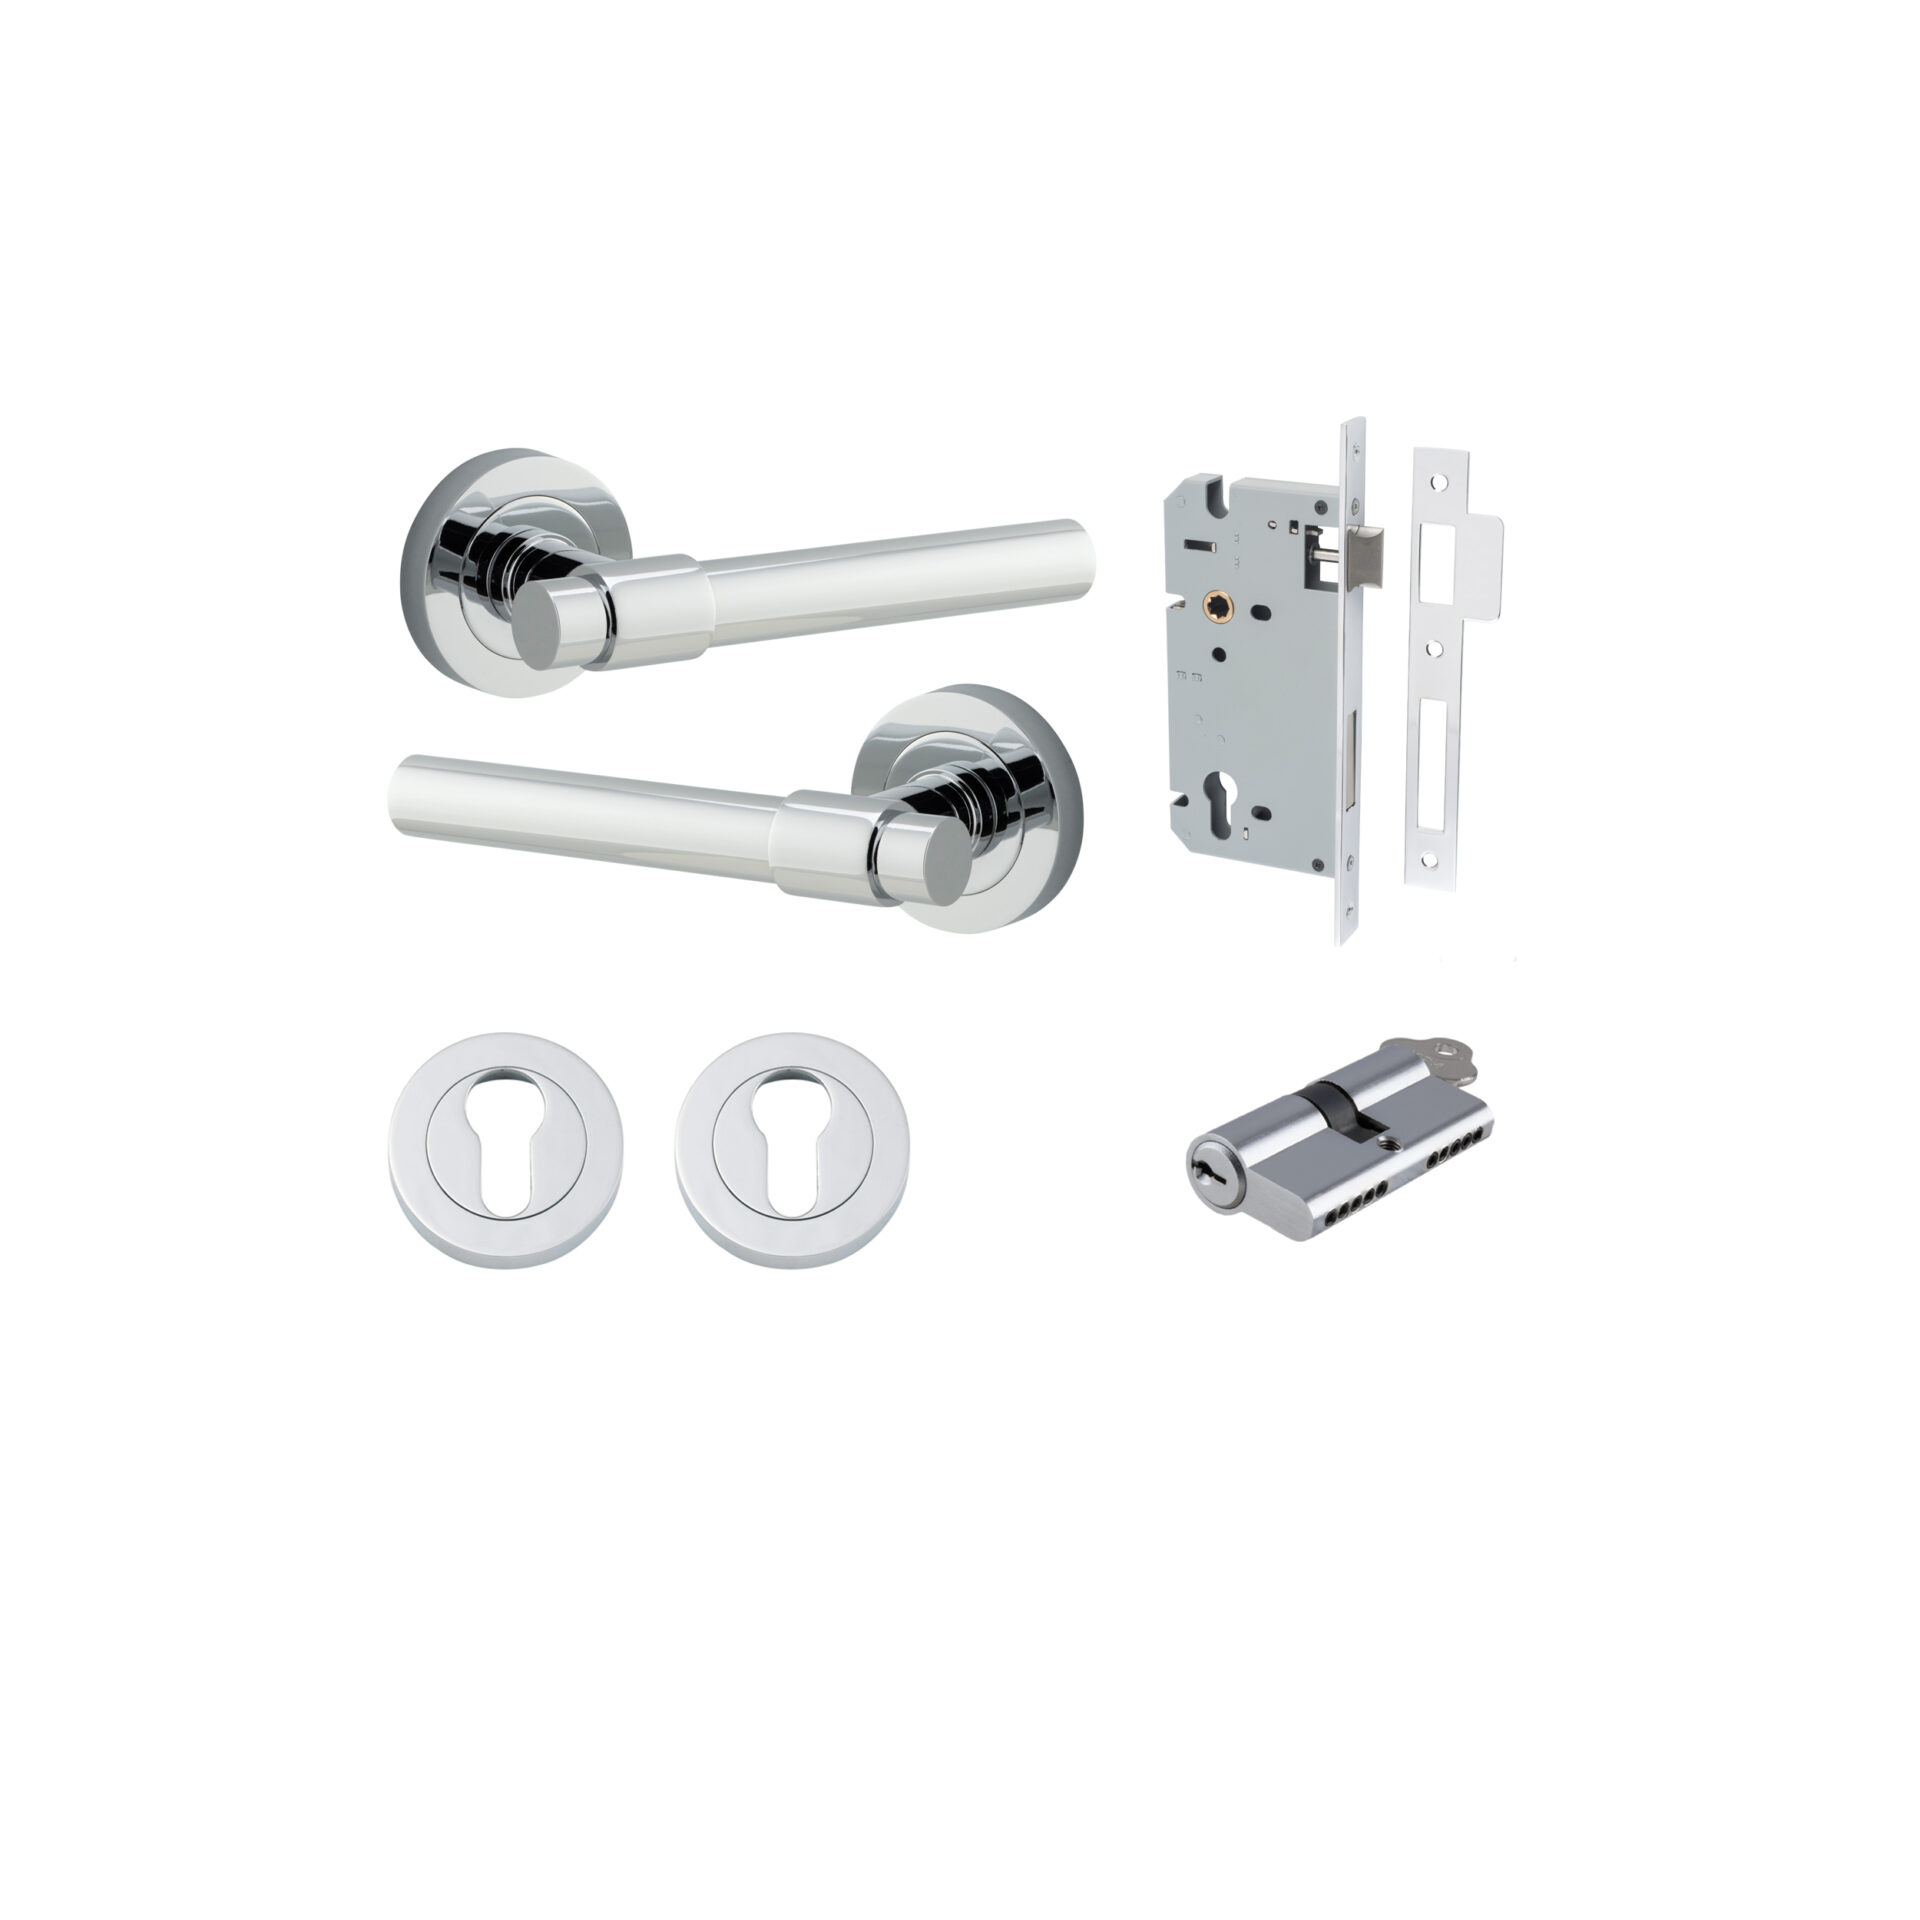 Helsinki Lever - Round Rose Entrance Kit with Separate High Security Lock